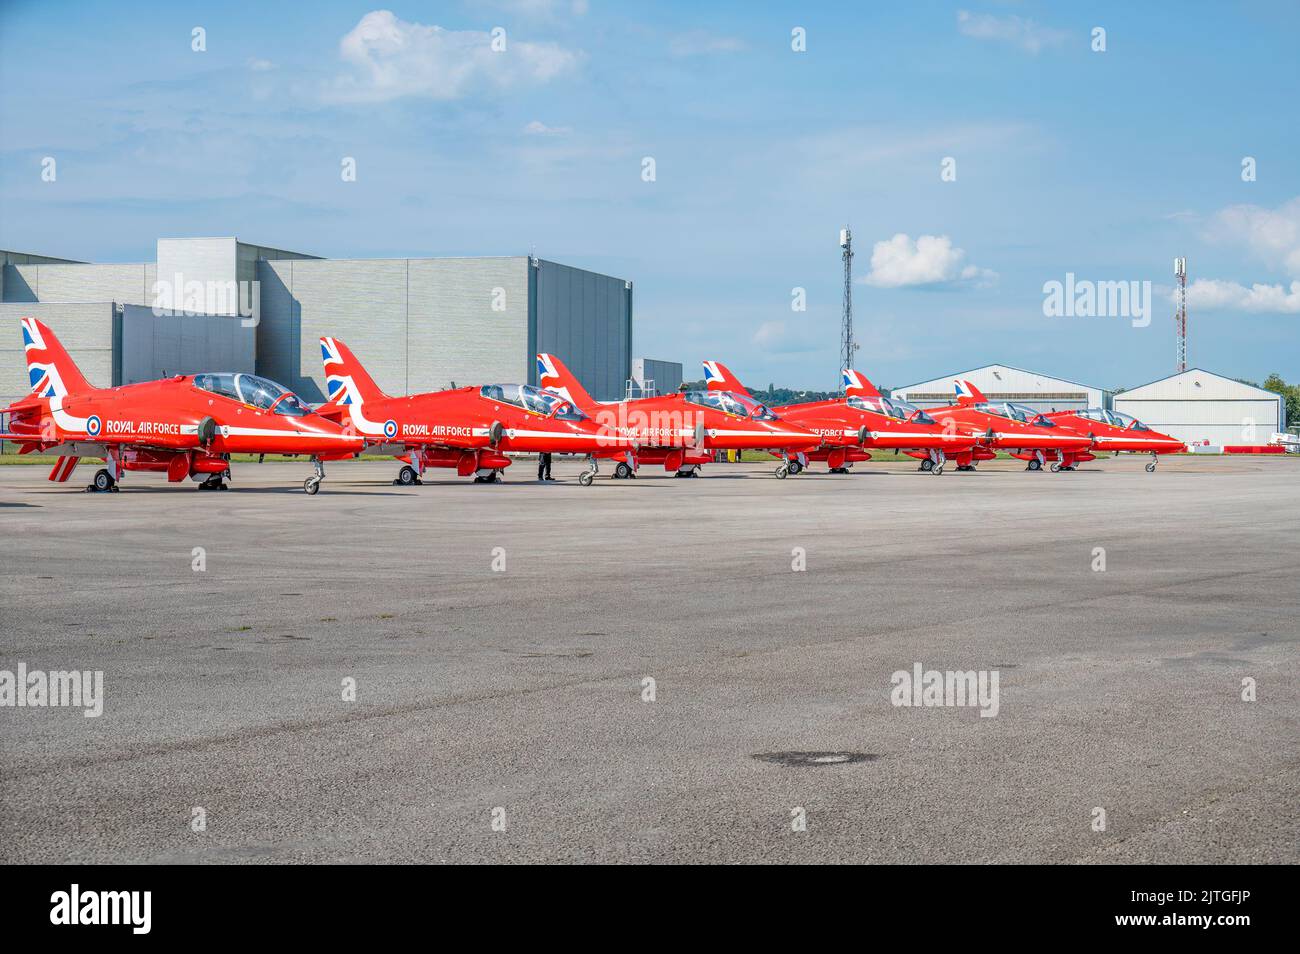 HAWARDEN, UK, 28TH AUGUST 2022: Red Arrows jets parked at Hawarden Airport Stock Photo